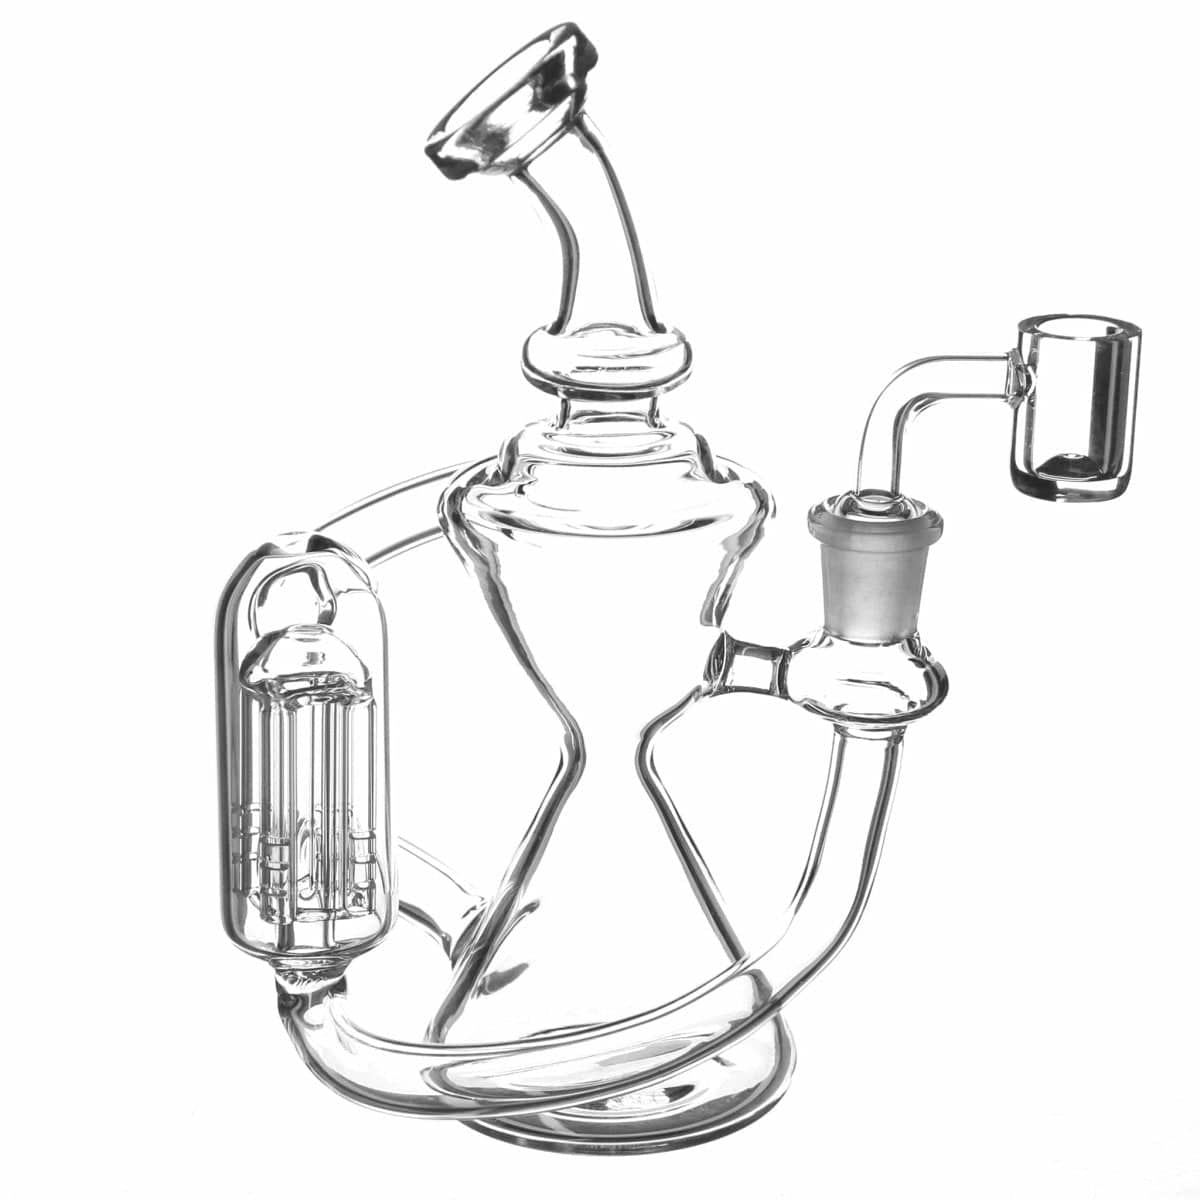 Benext Generation Floating Tree Perc Recycler Dab Rig